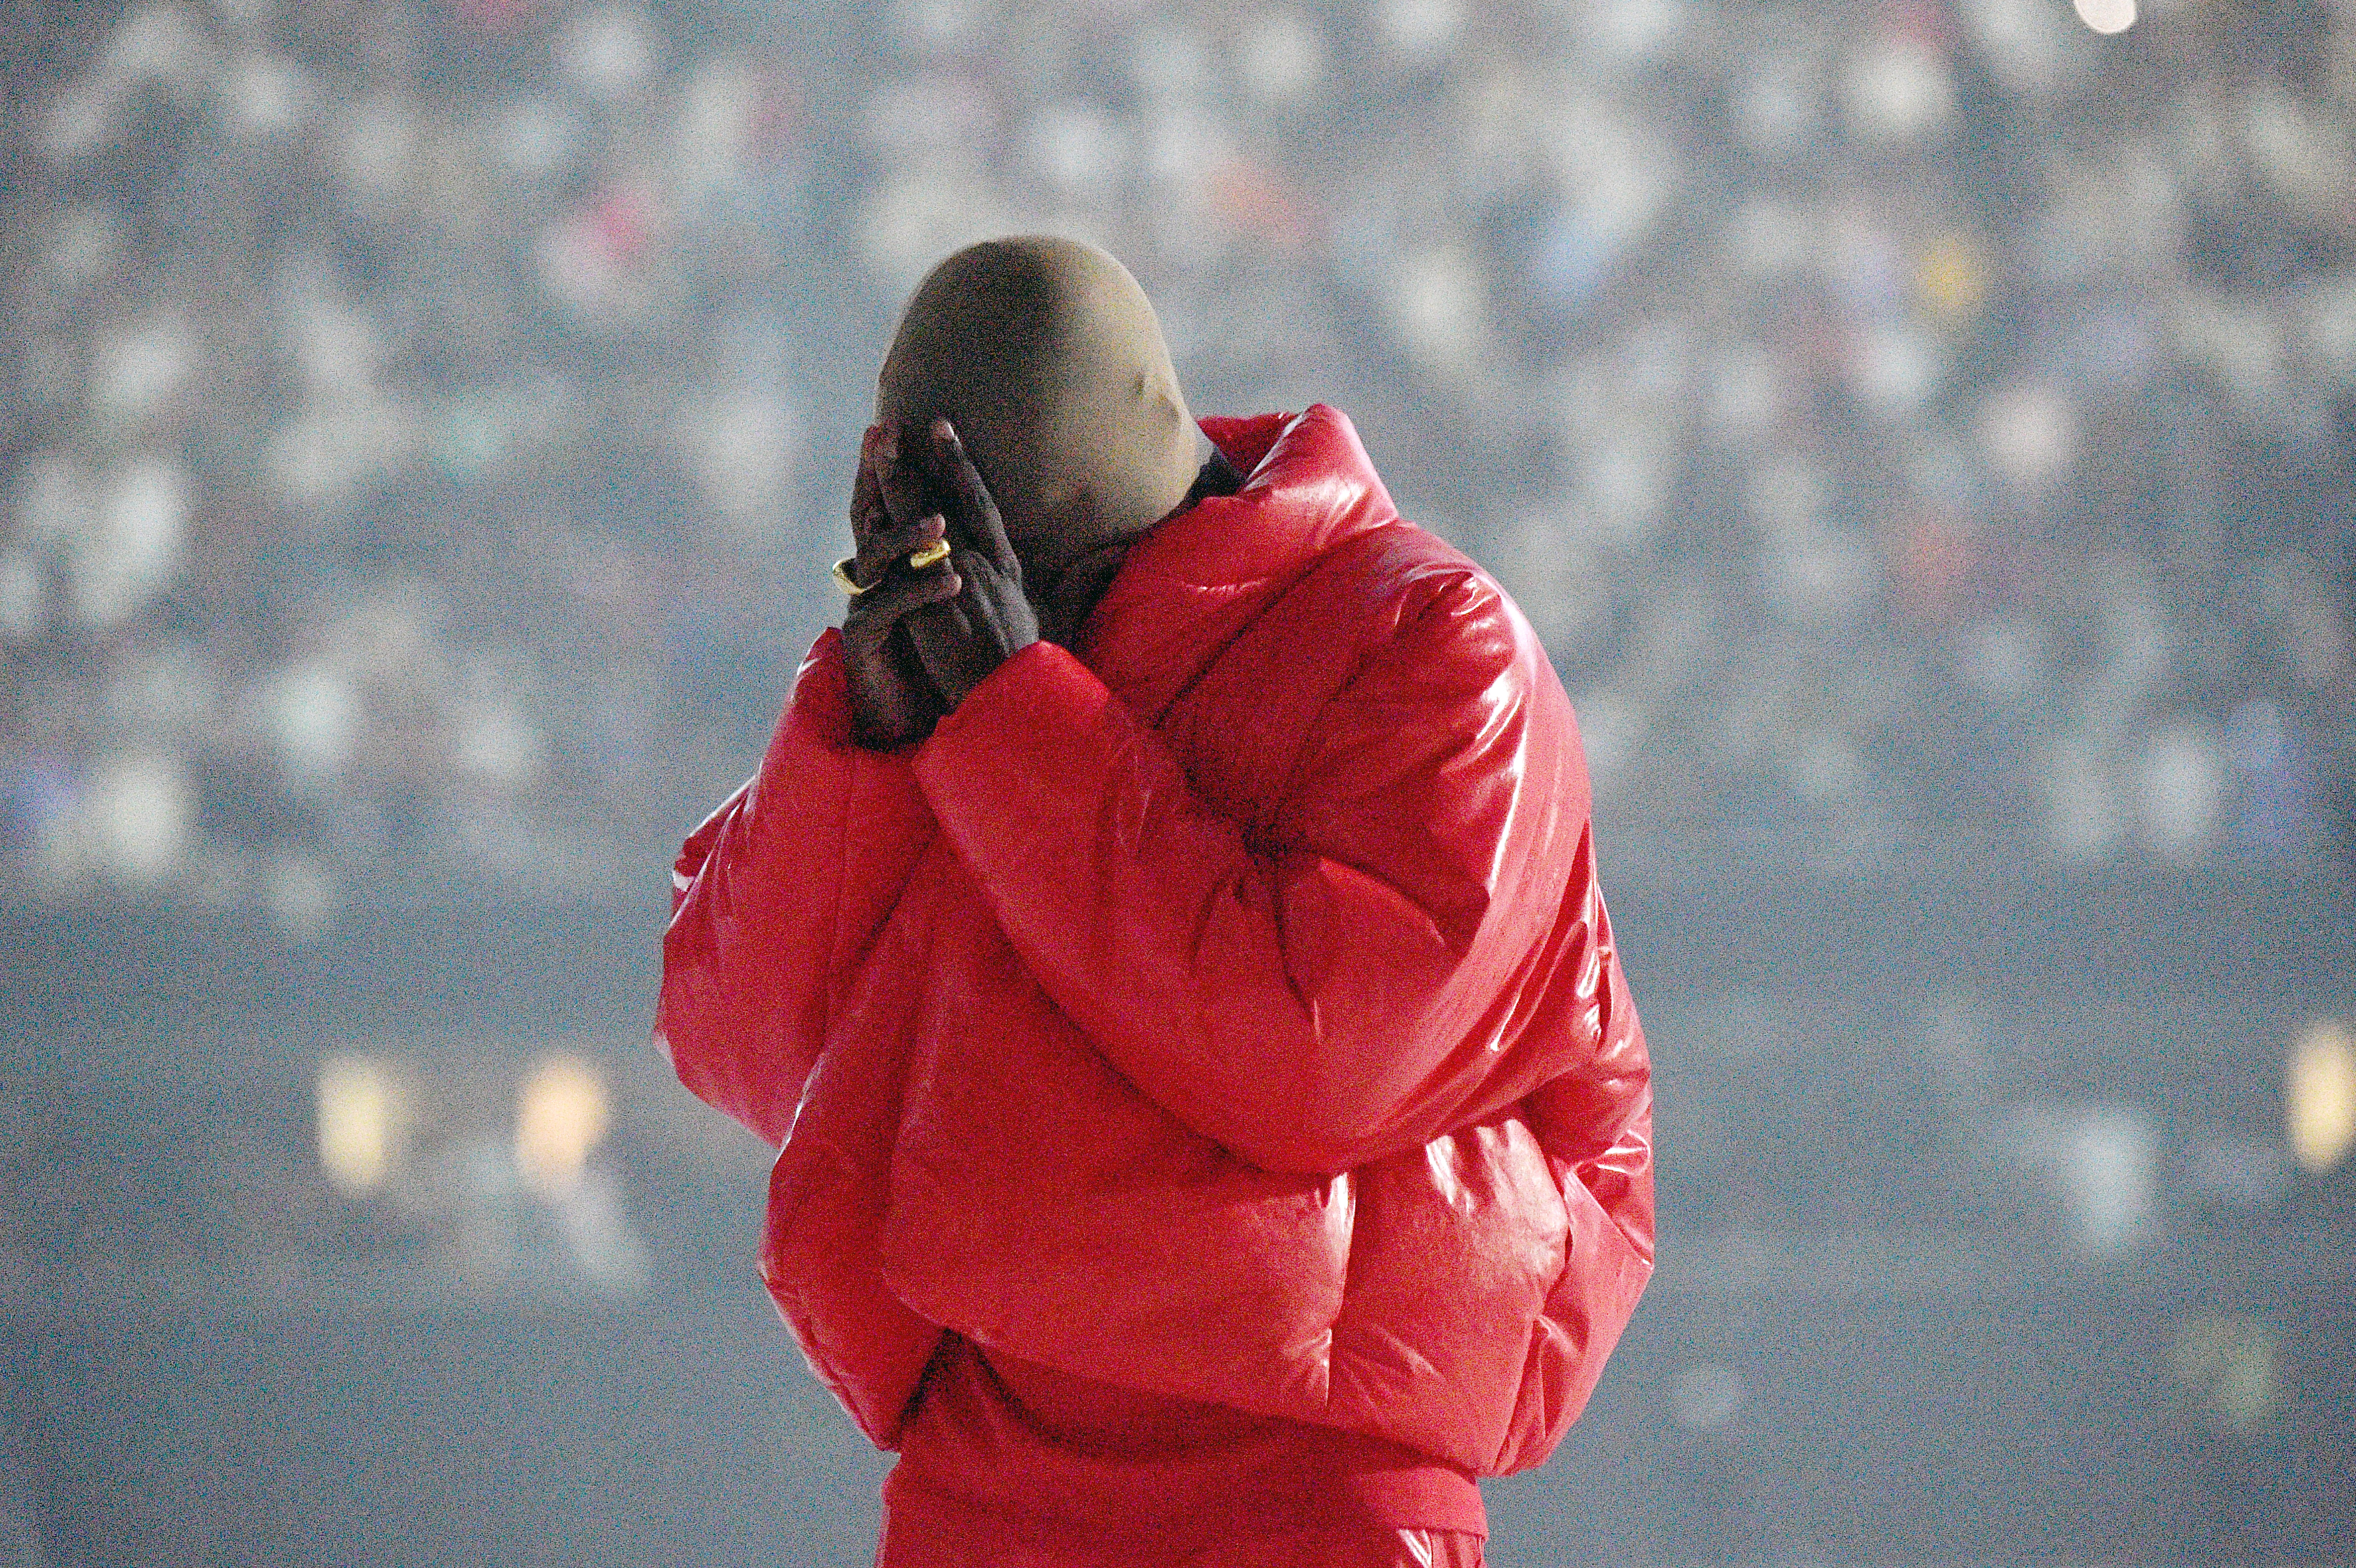 Kanye West at a "Donda" listening event at Mercedes-Benz Stadium on July 22, 2021 in Atlanta, Georgia. (Kevin Mazur/Getty Images for Universal Music Group)